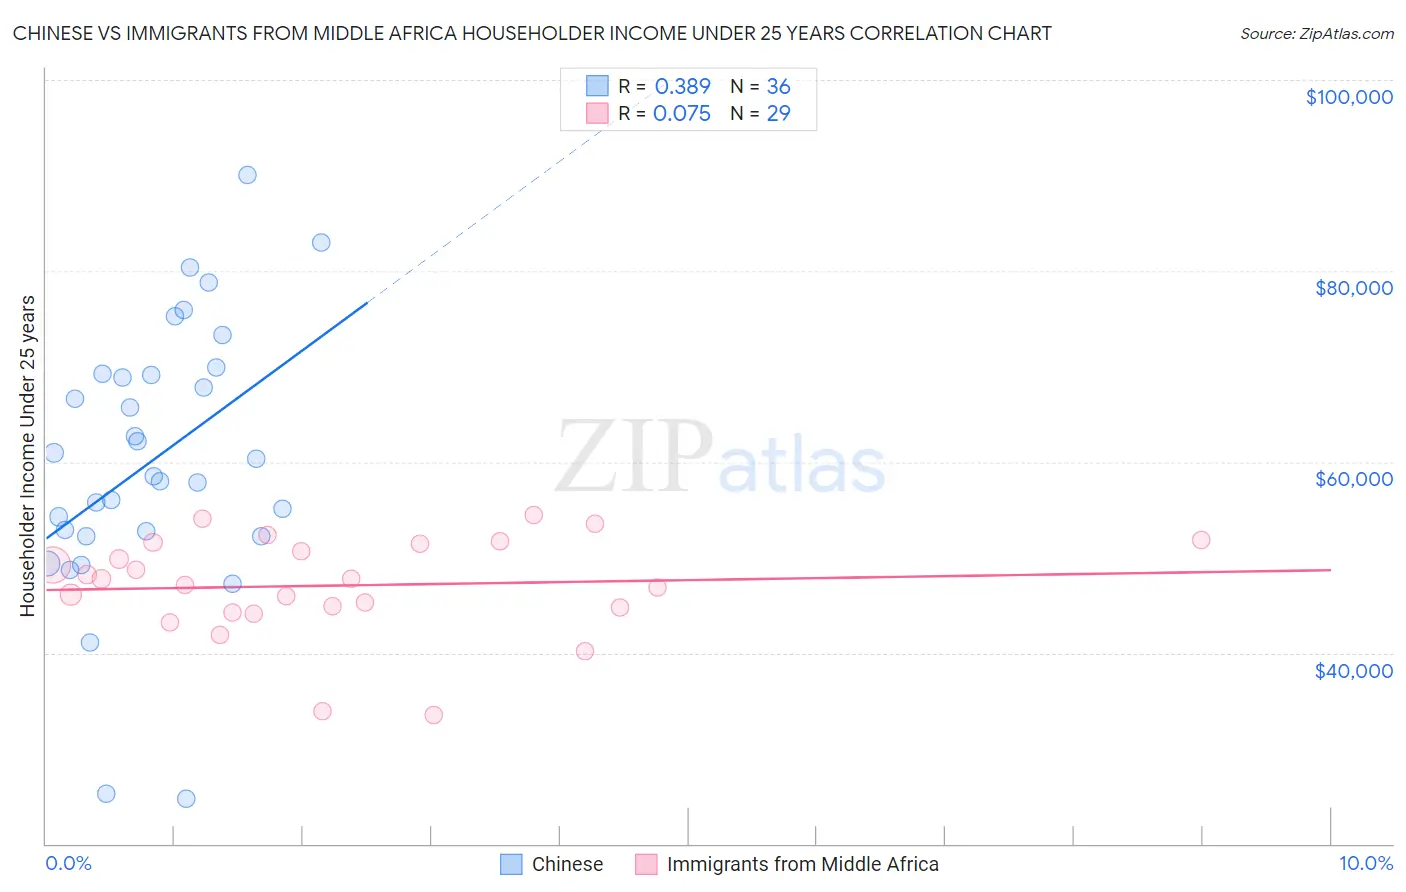 Chinese vs Immigrants from Middle Africa Householder Income Under 25 years